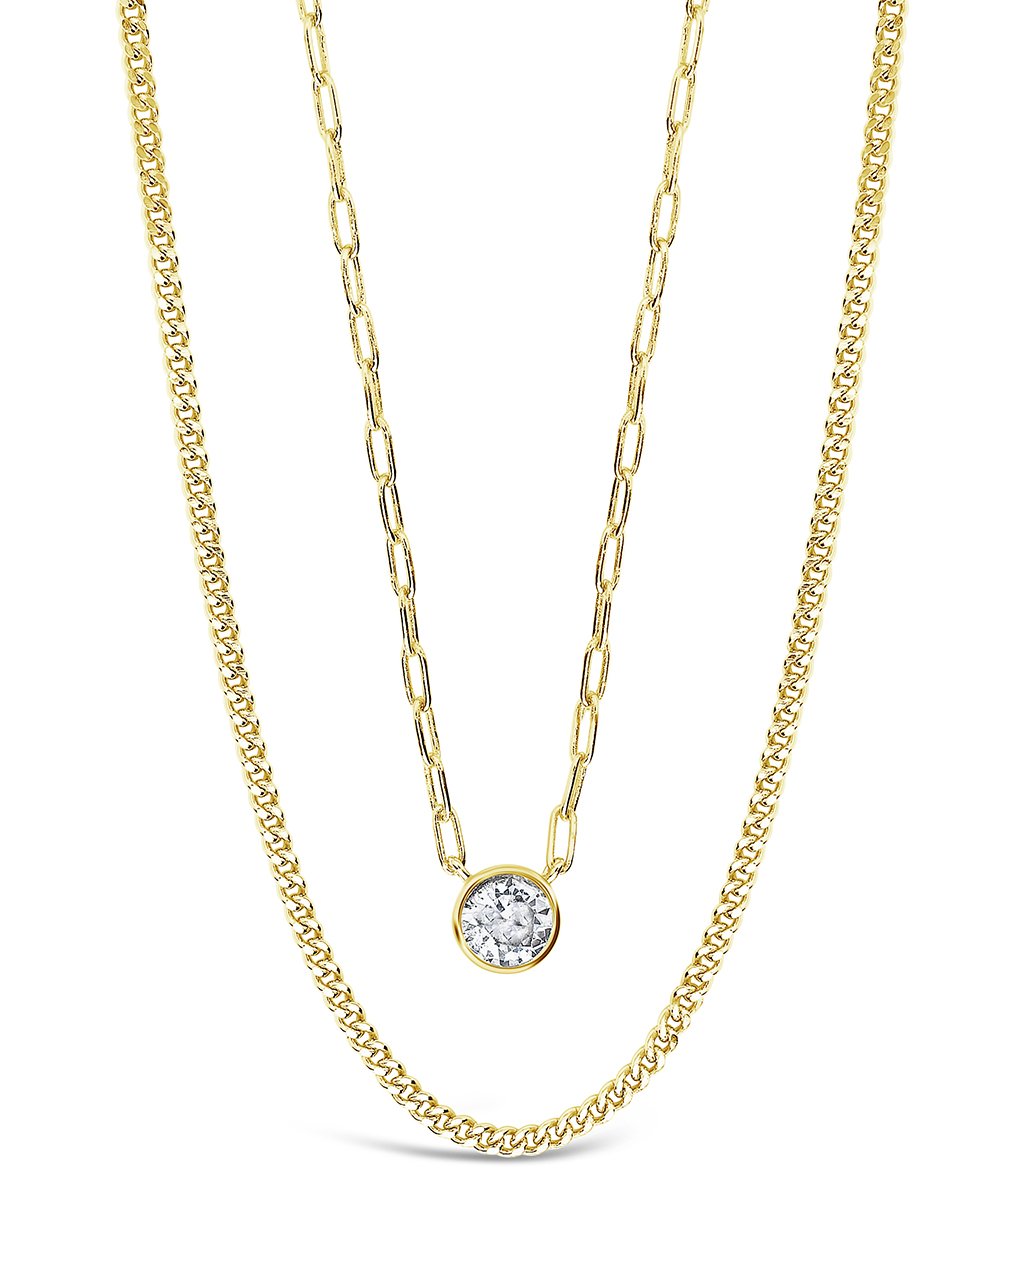 Delicate Sterling Silver 2 Layer Chain Necklace with Bezel CZ Charm Necklace Sterling Forever Gold 